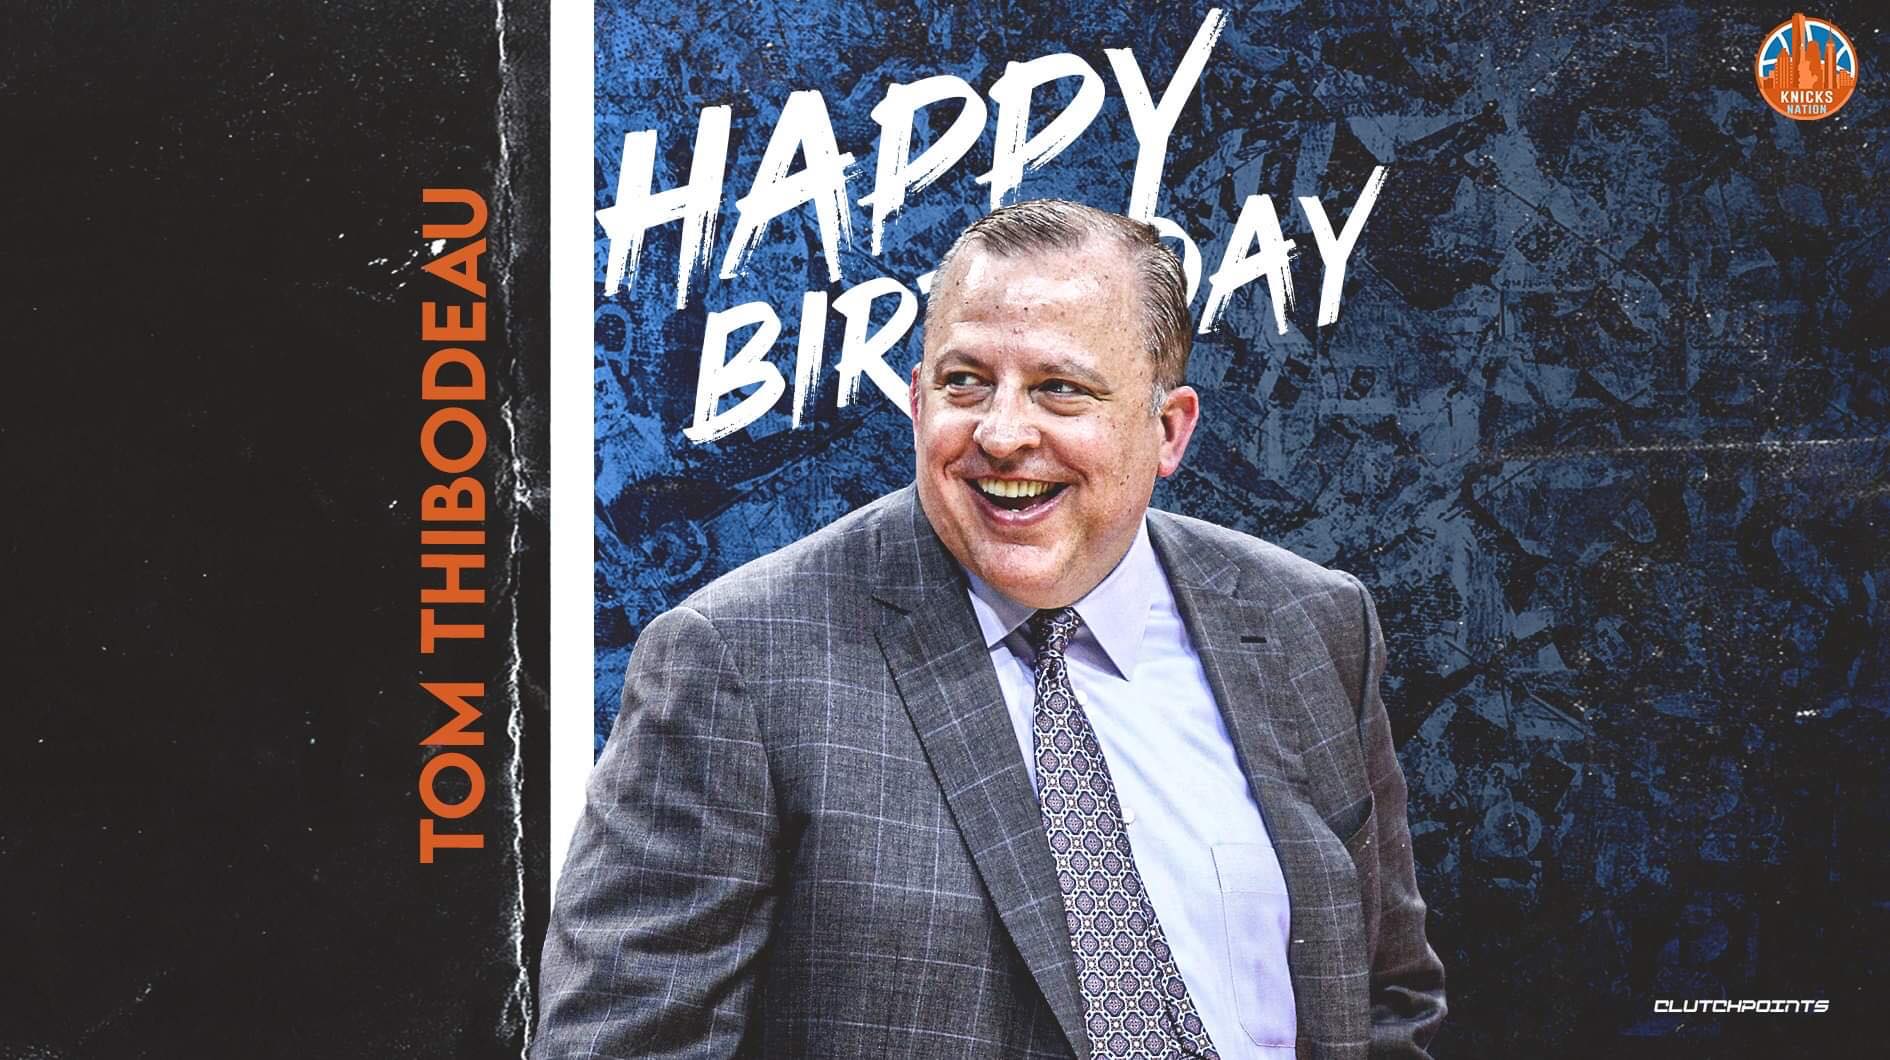 Join Knicks Nation in wishing Tom Thibodeau a happy 63rd birthday!  